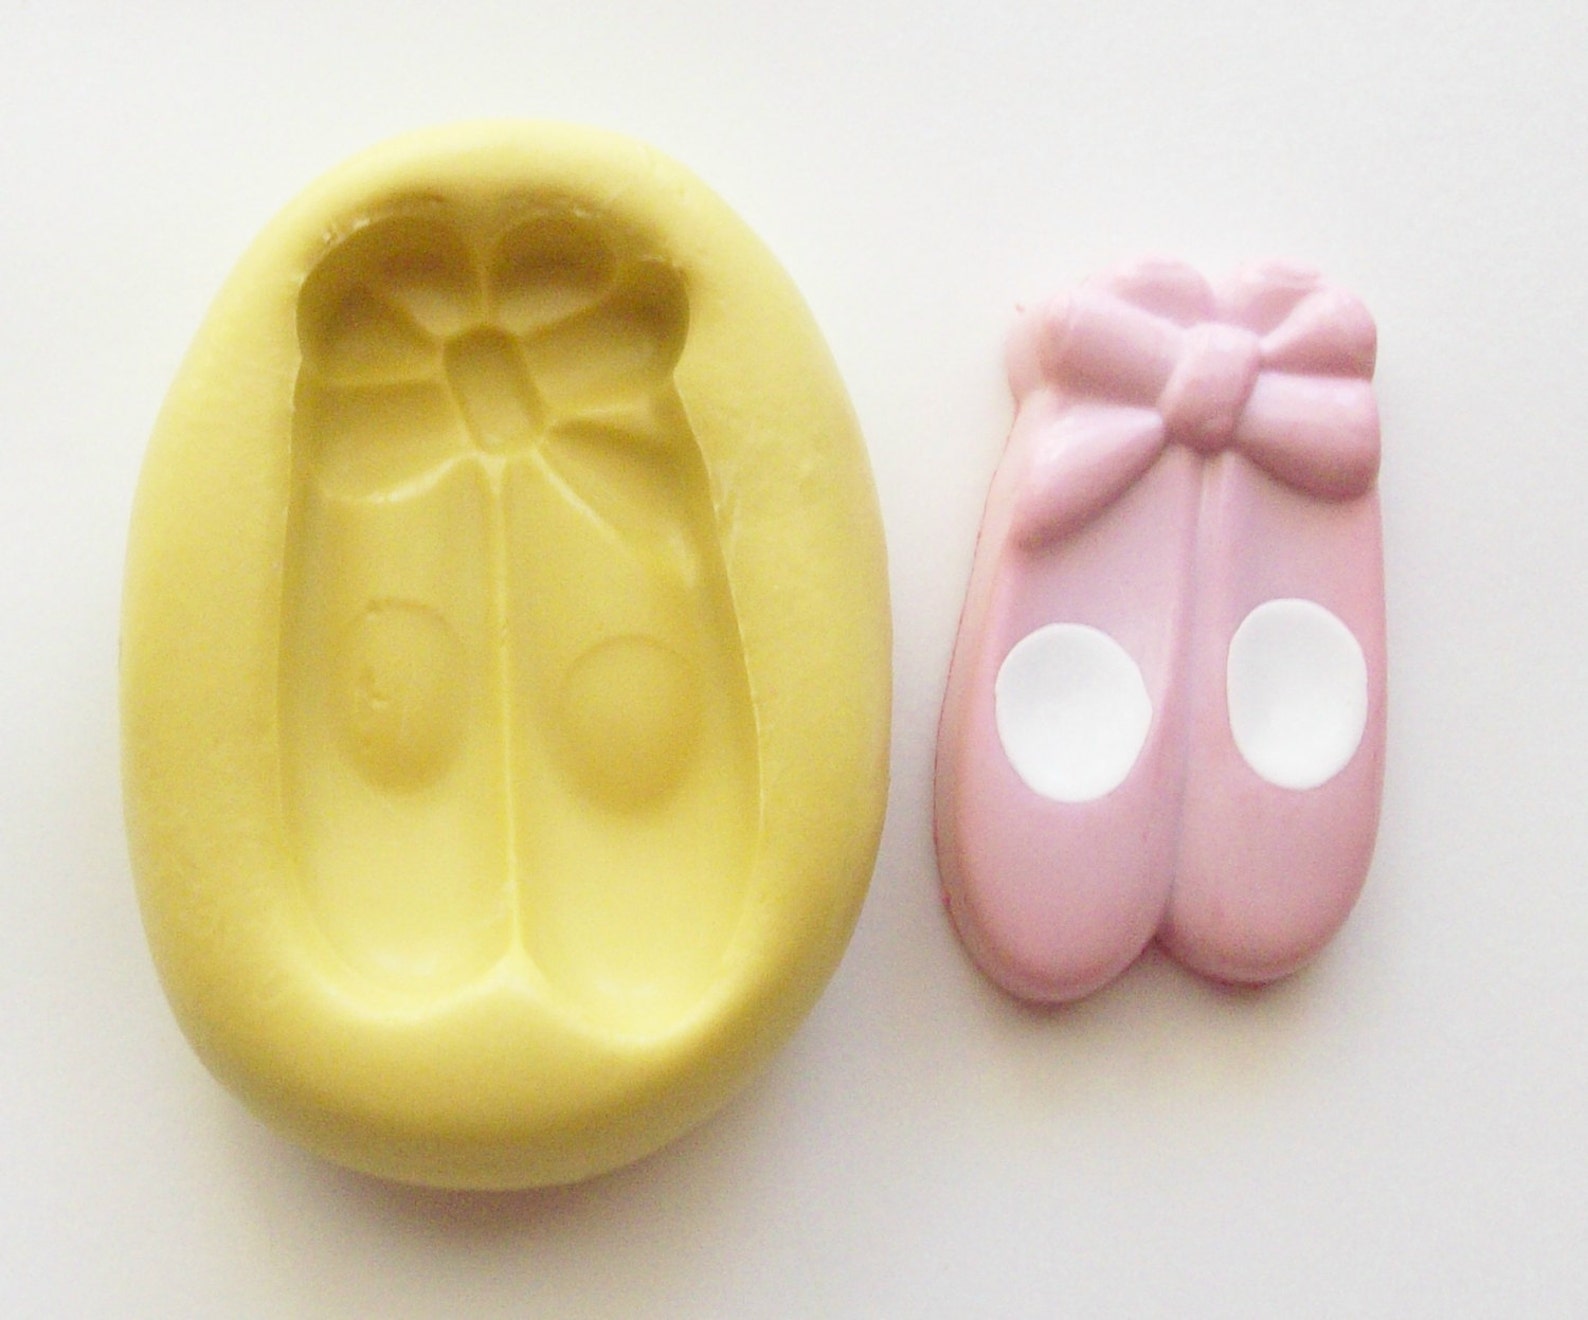 ballet shoes mold - silicone mold for crafts, handmade with fda approved silicone for food and other materials, great for jewelr